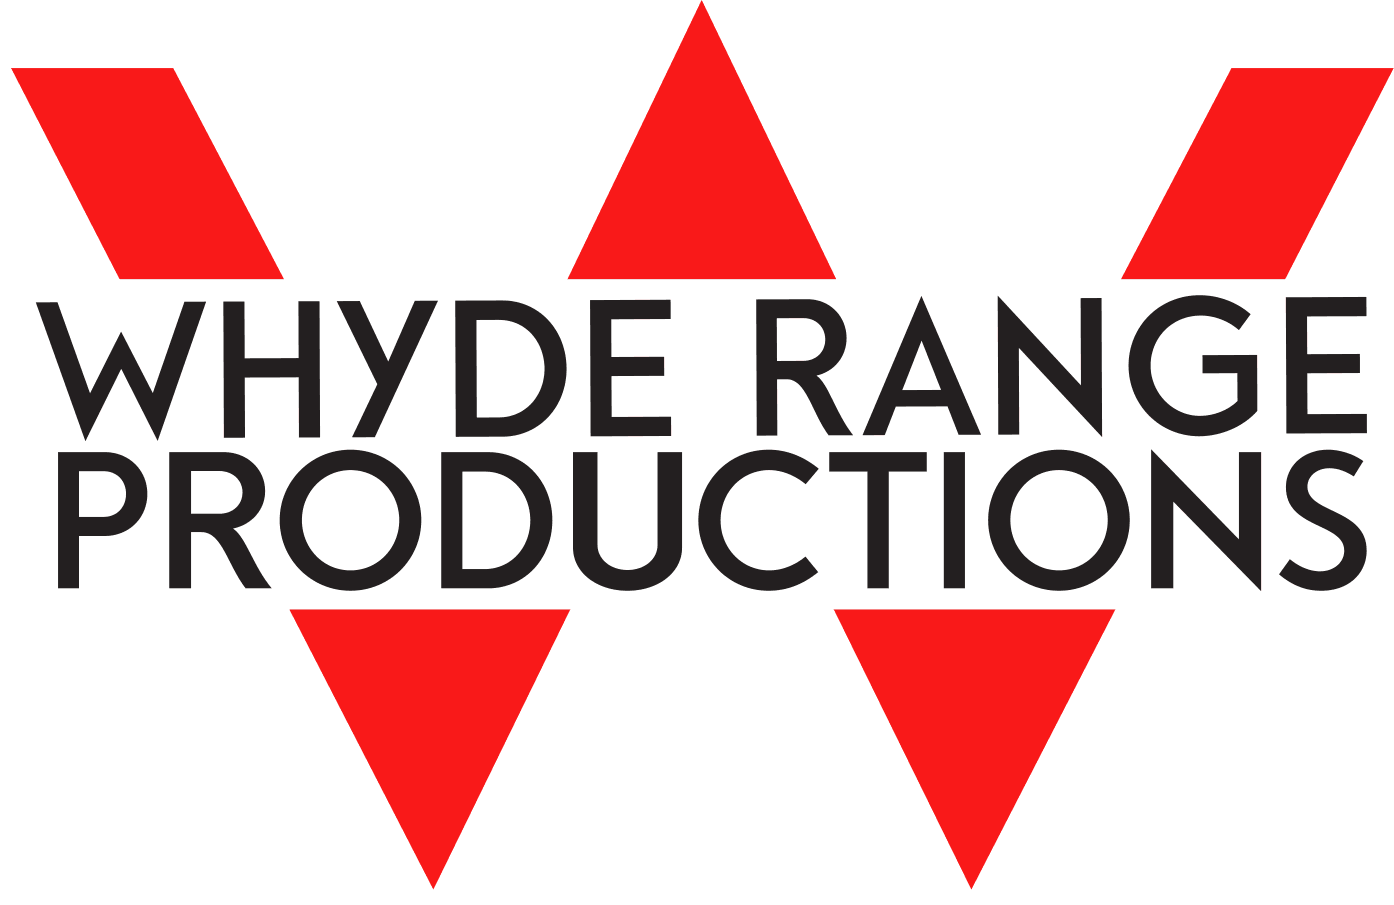 Whyde Range Productions